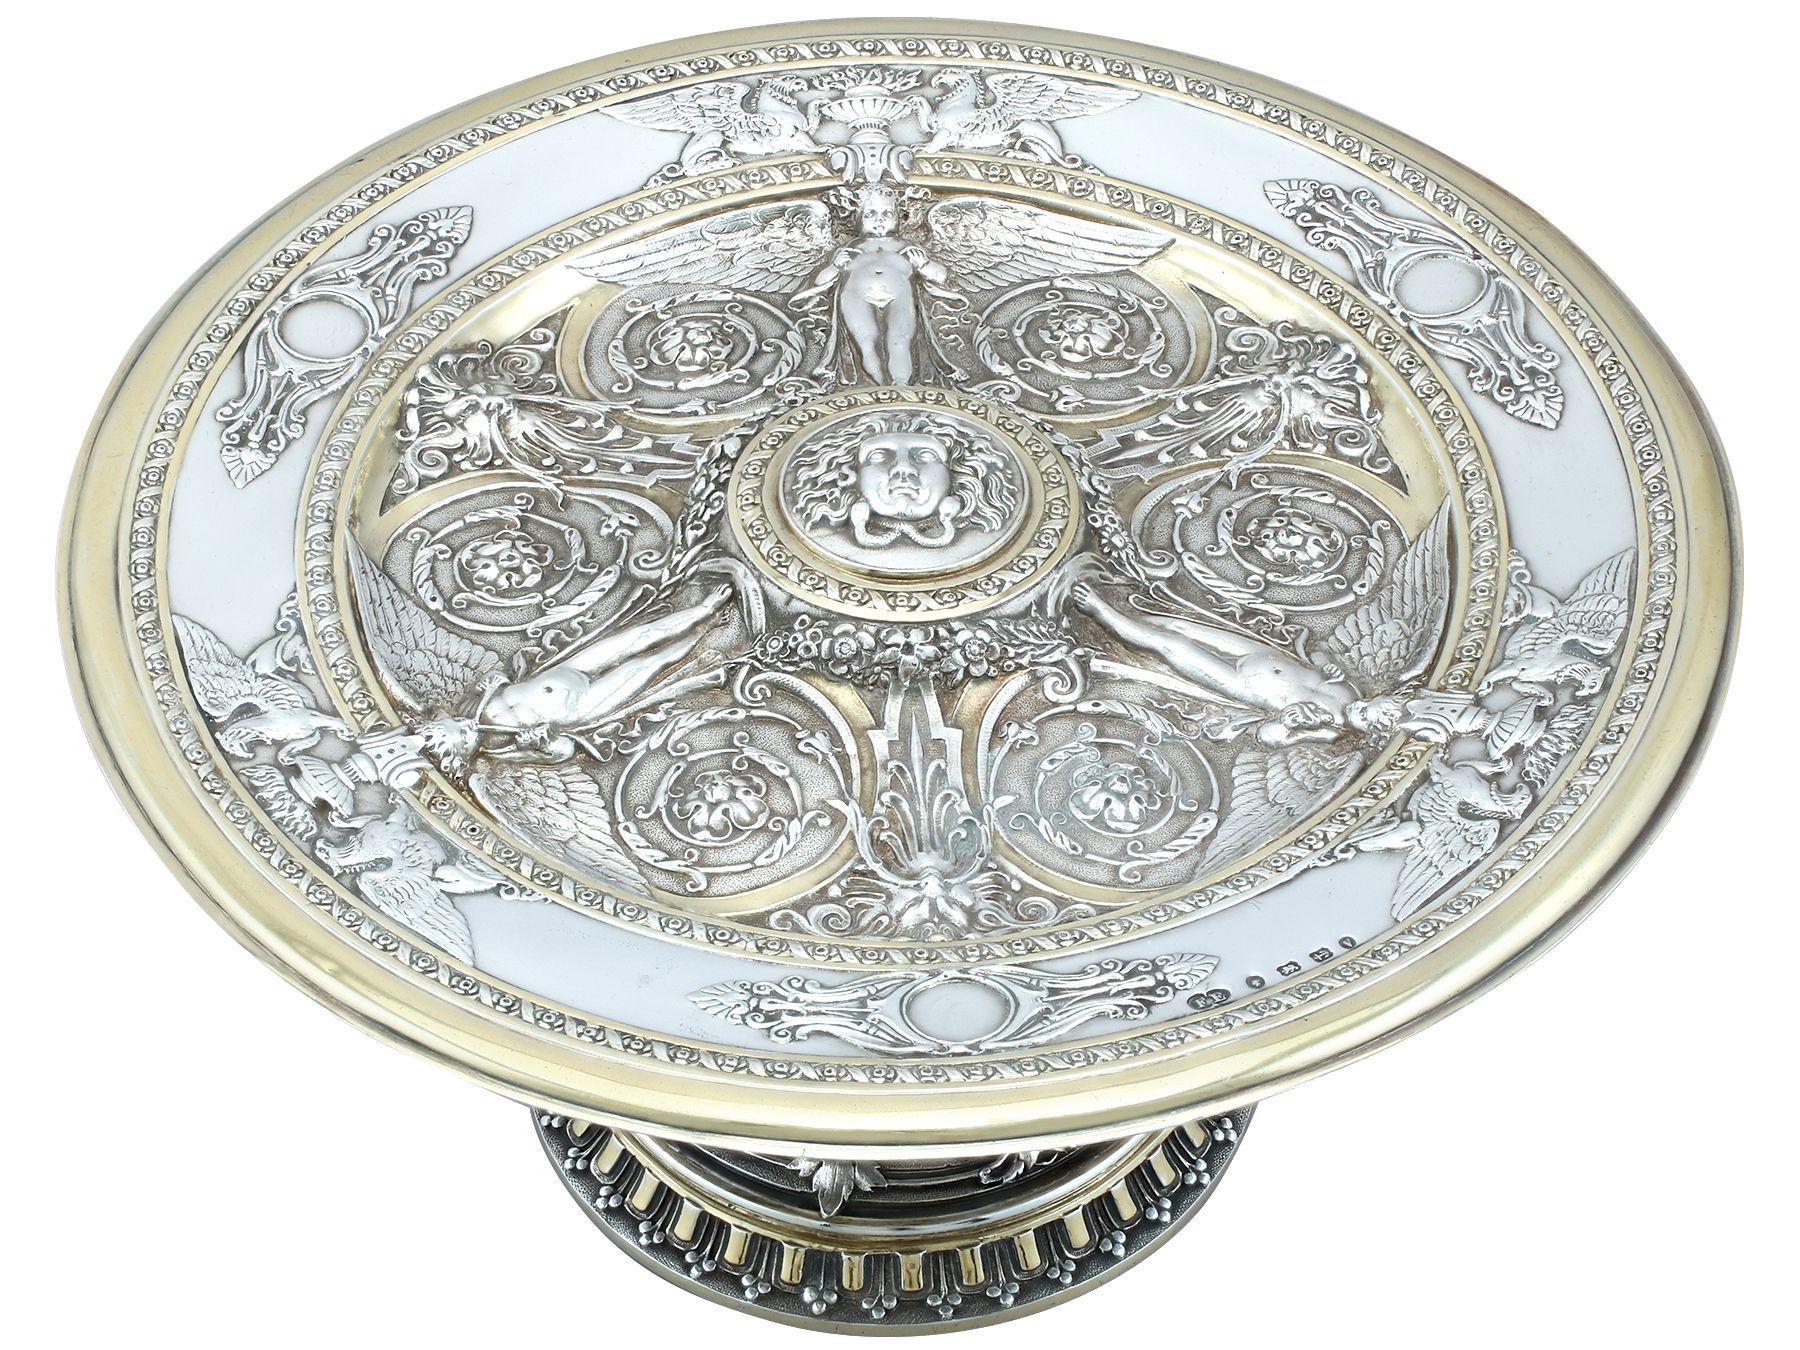 A magnificent, fine and impressive antique Victorian English sterling silver tazza with parcel gilt highlights; part of our ornamental silverware collection

Description

This exceptional antique Victorian sterling silver tazza has a plain